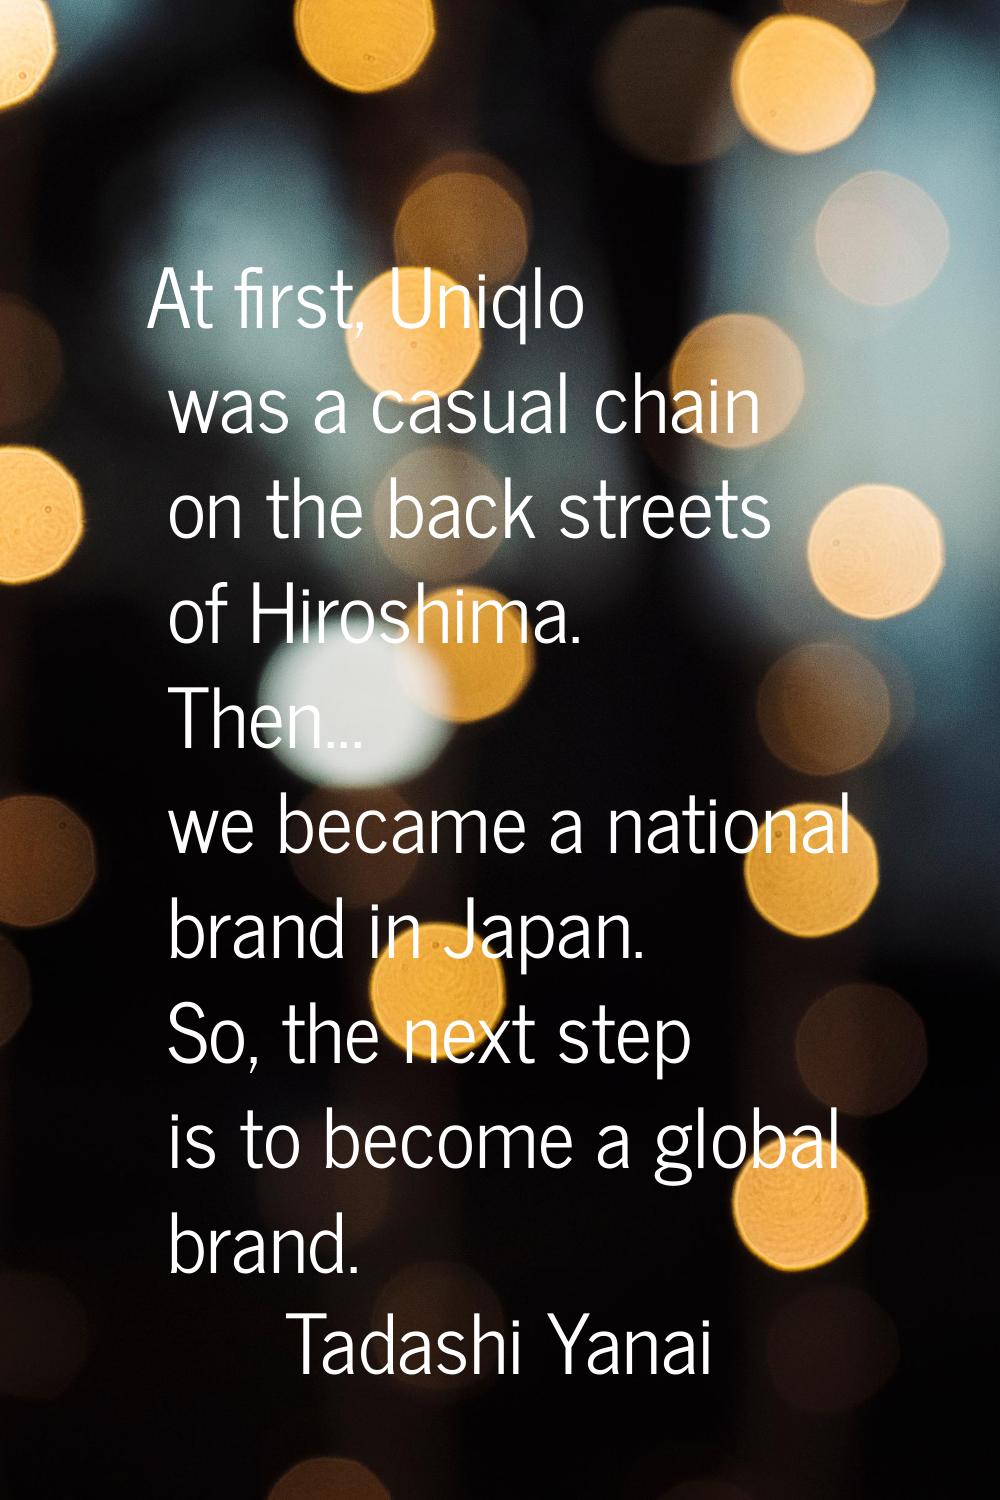 At first, Uniqlo was a casual chain on the back streets of Hiroshima. Then... we became a national 